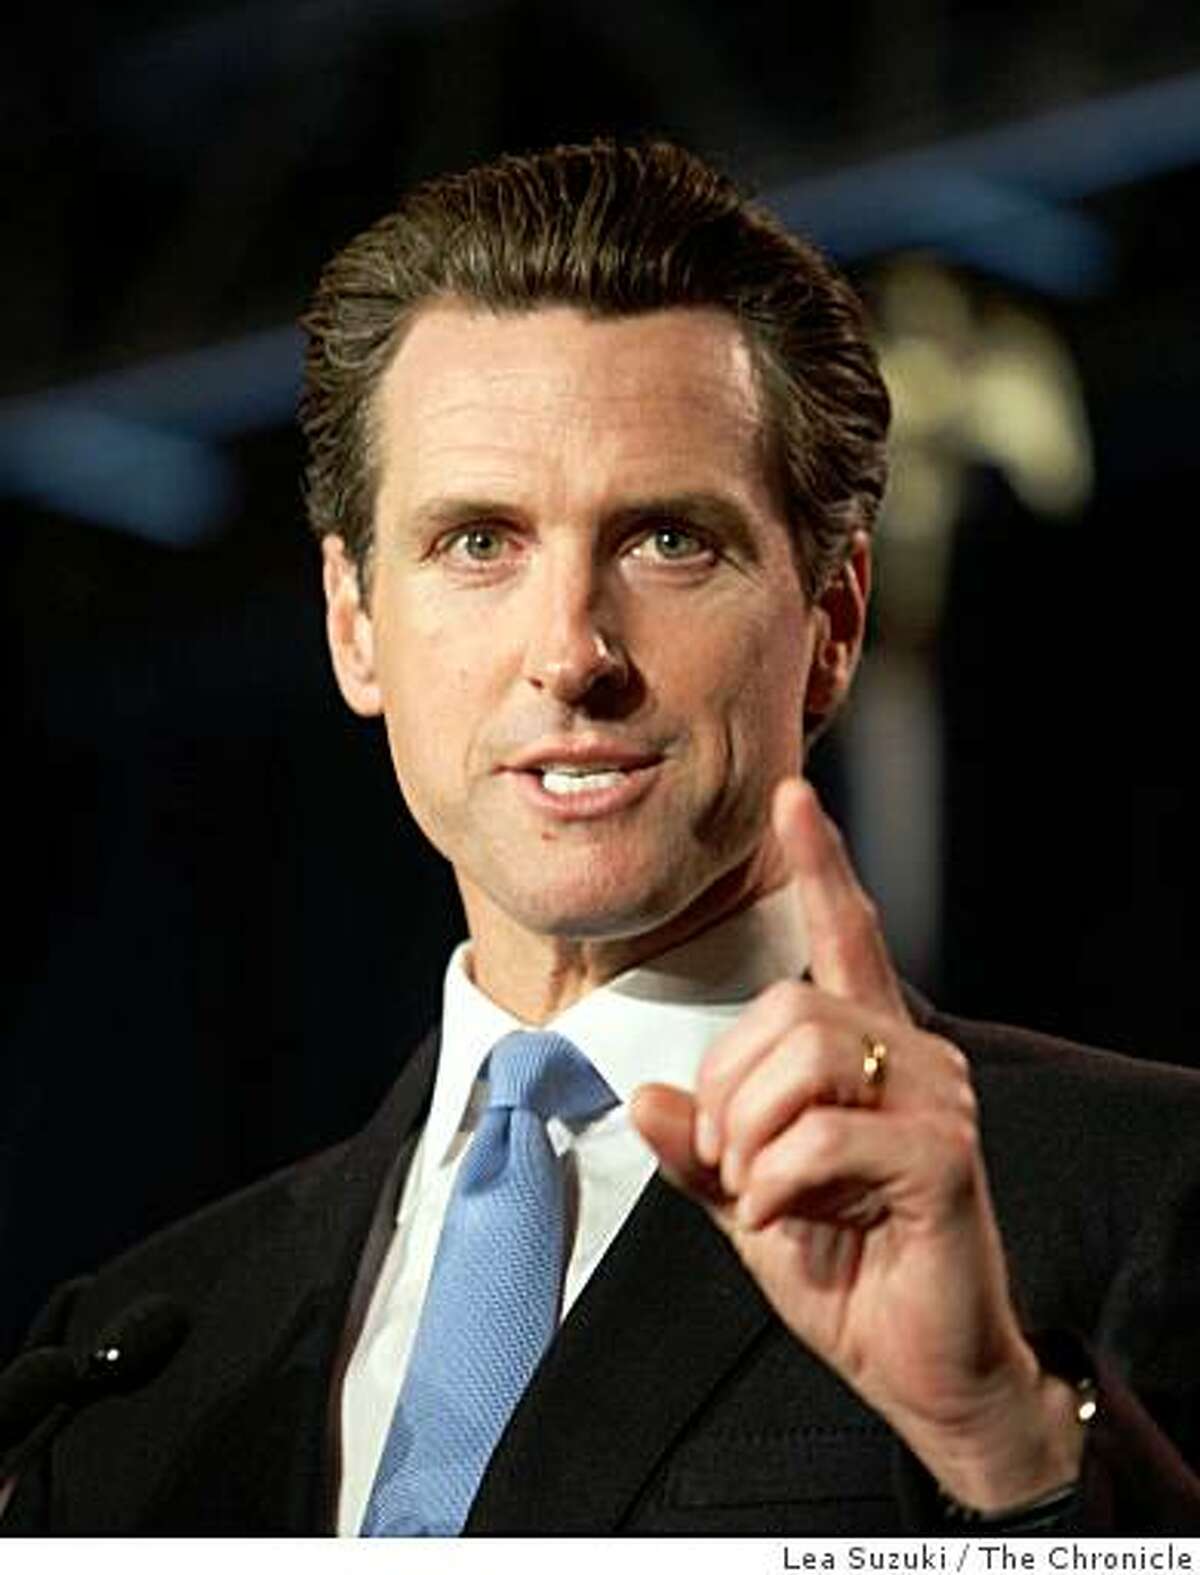 Mayor Gavin Newsom speaks at the No on 8 party at the Westin St. Francis on Tuesday, November 4, 2008 in San Francisco, Calif.